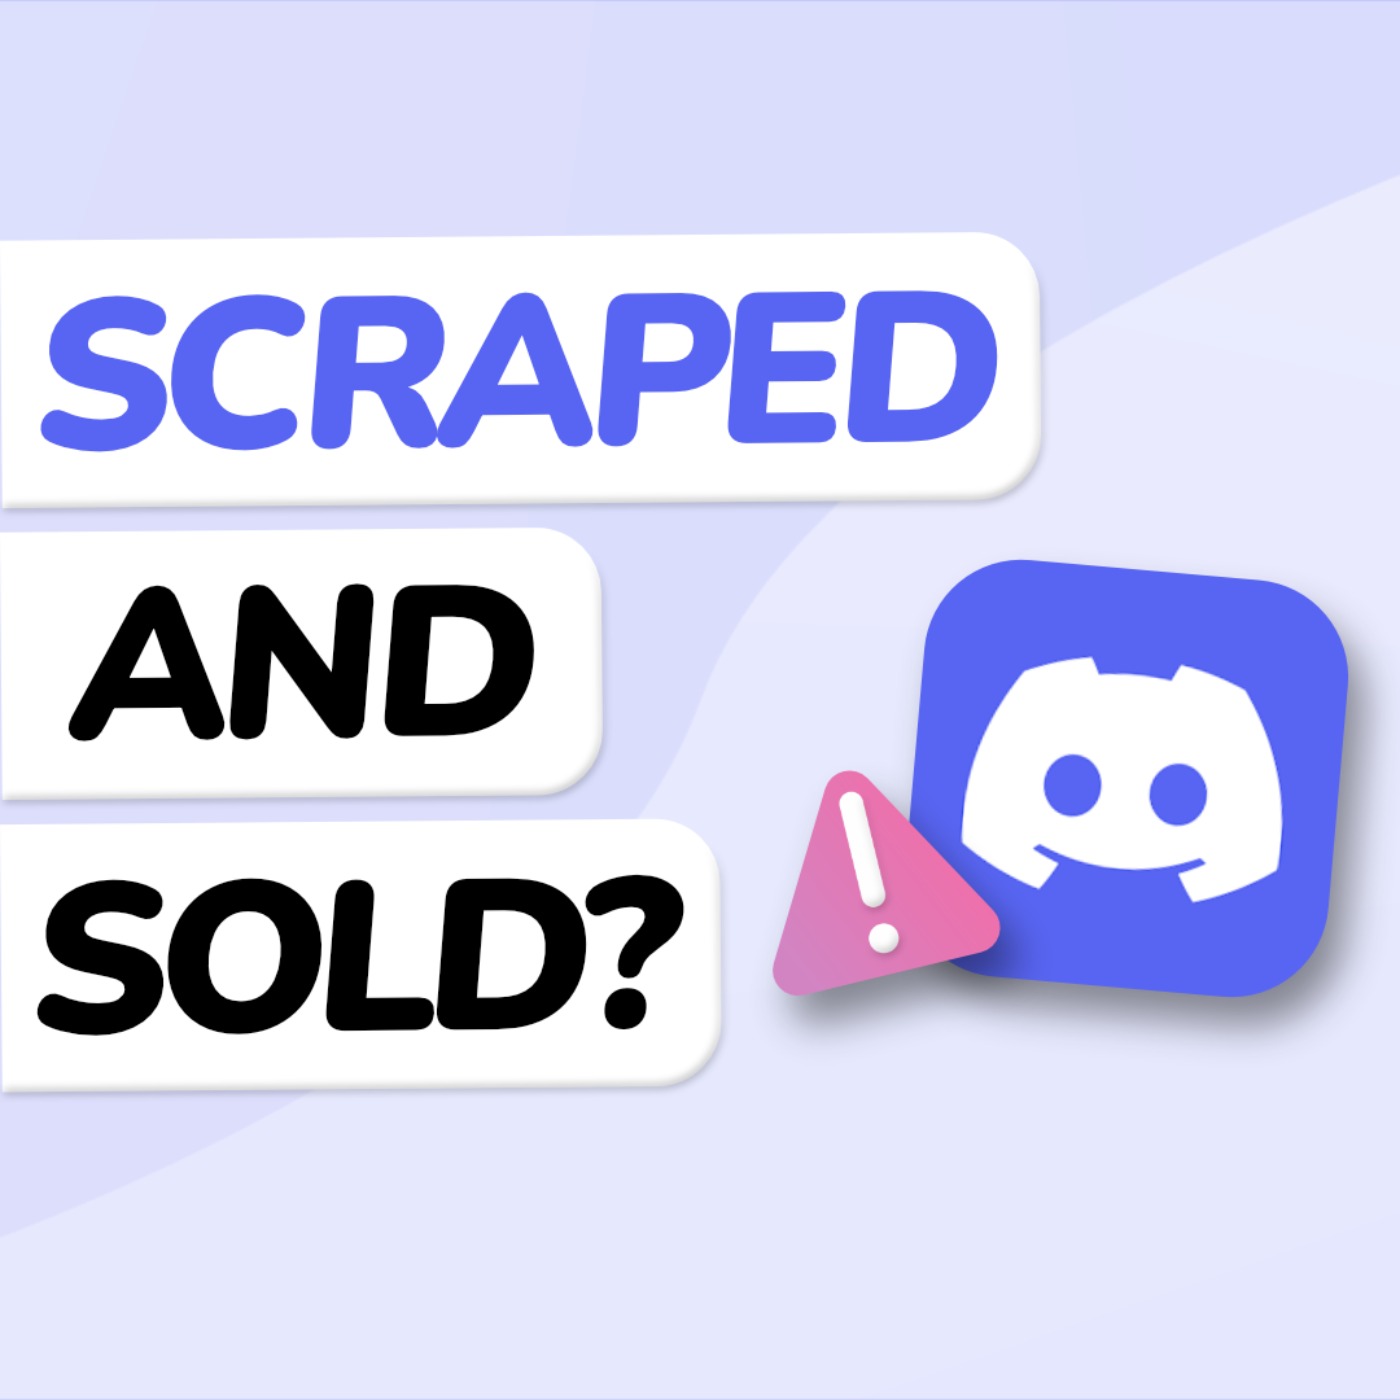 Are Your Discord Messages For Public Sale?